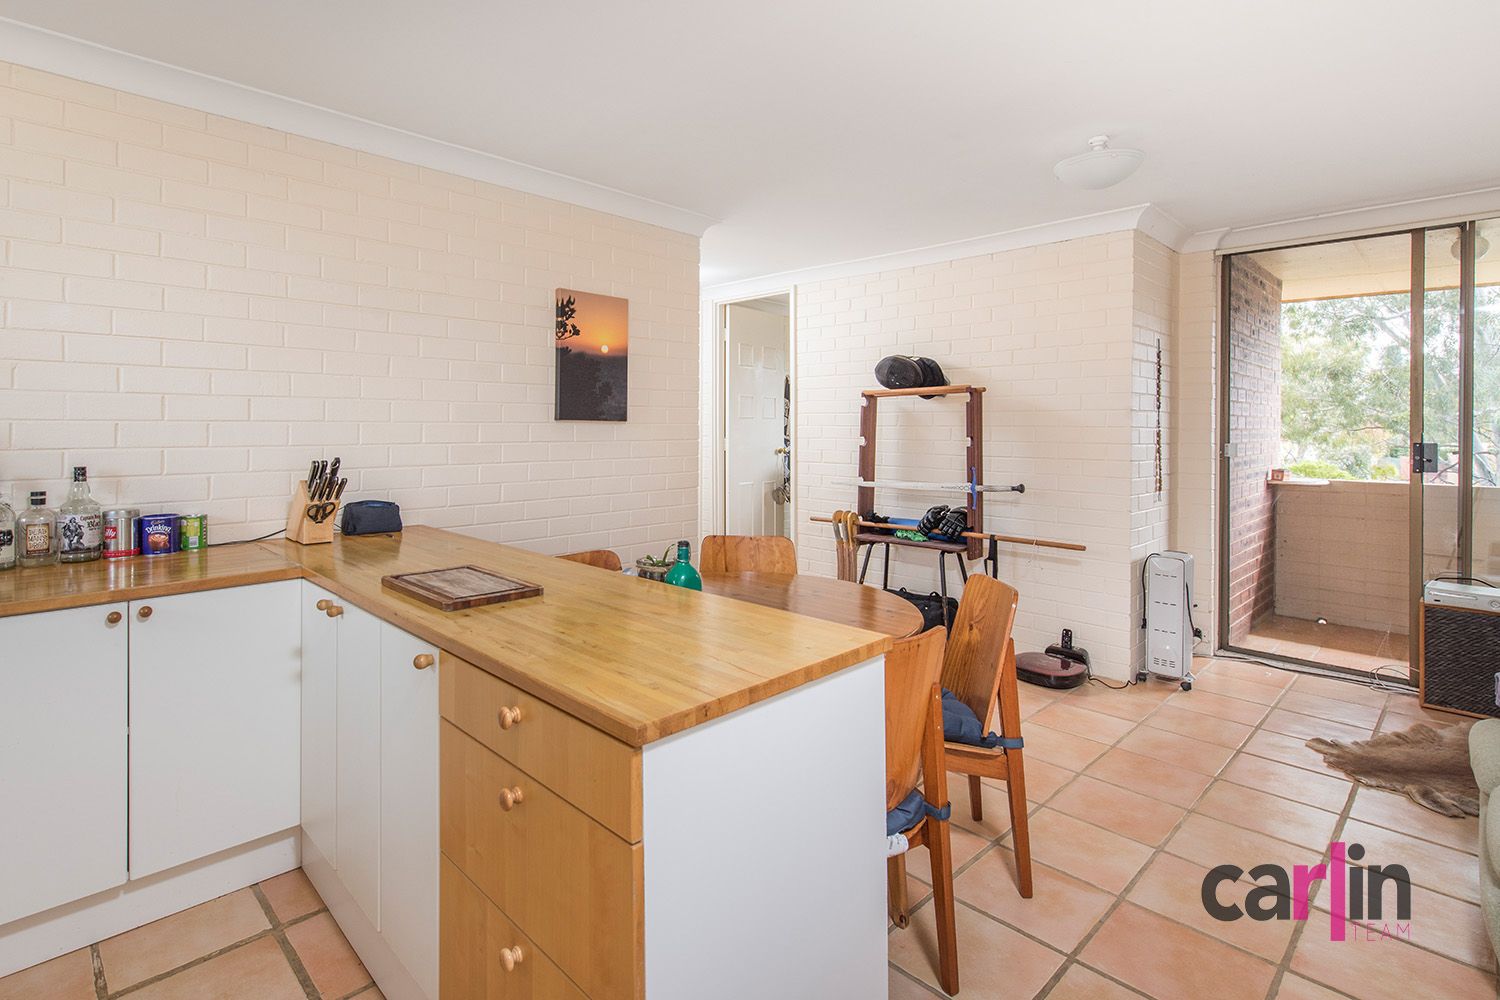 2 bedrooms Apartment / Unit / Flat in 24/2 Bennelong Place LEEDERVILLE WA, 6007